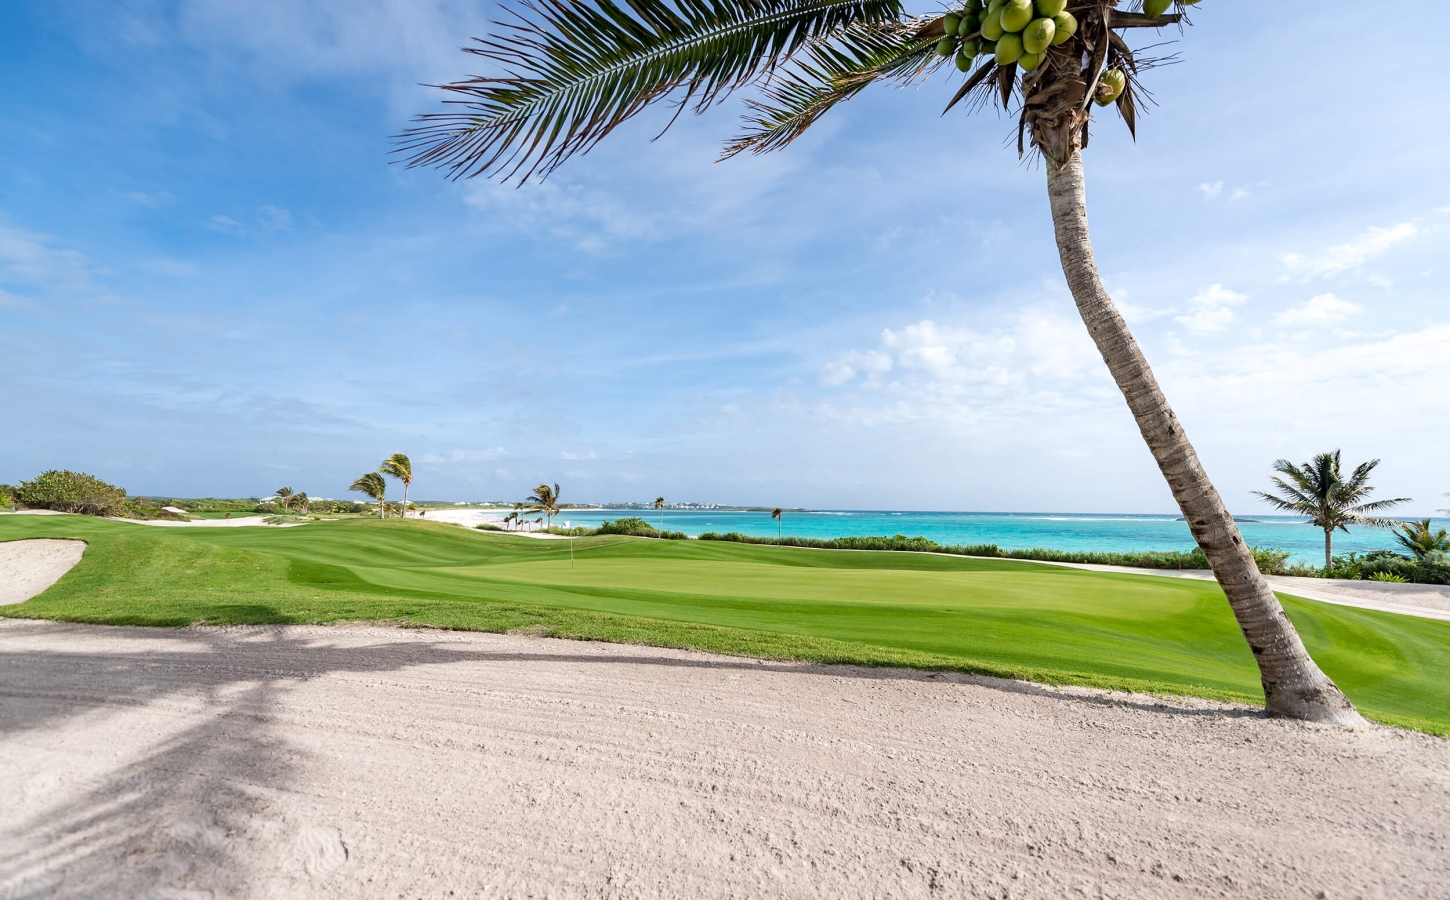 The Abaco Club 5th Green overlooking a tranquil Bahamas sea